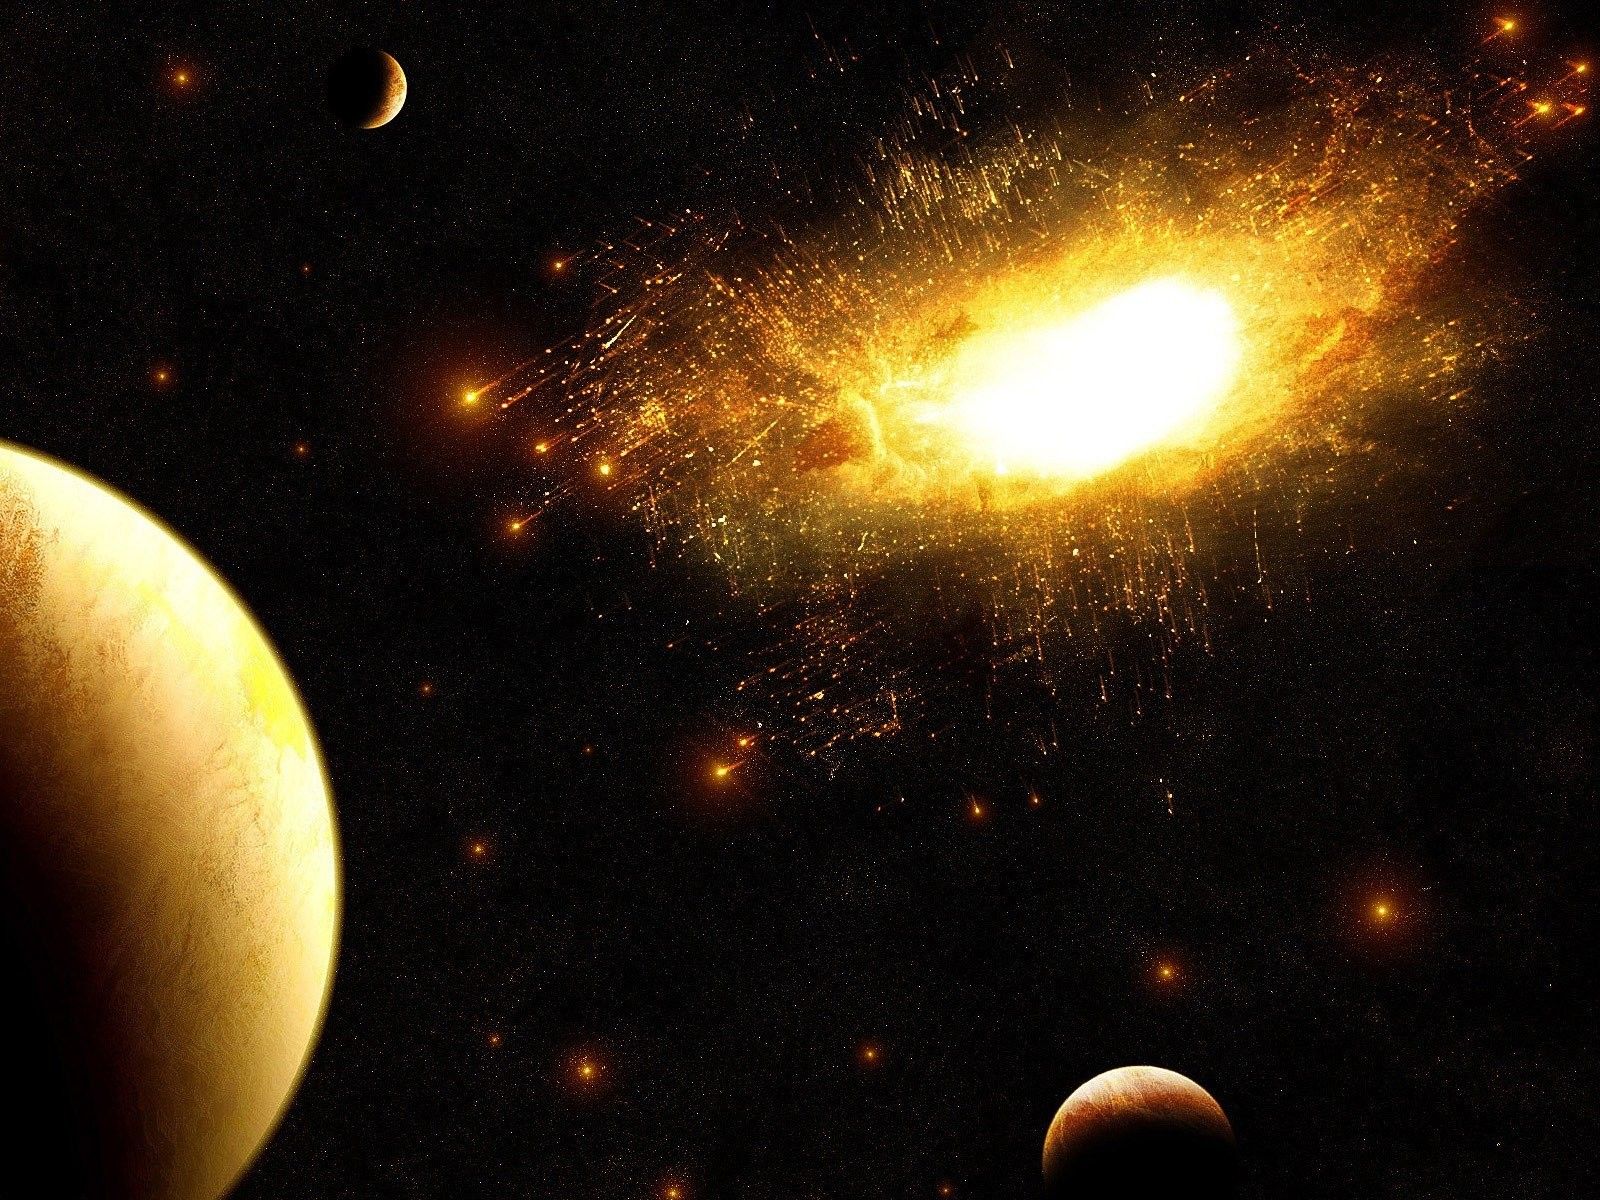 Planets Background Image, outer, Space, Multicolor, Bright, Stars, Gold, Desktop Image, Stars